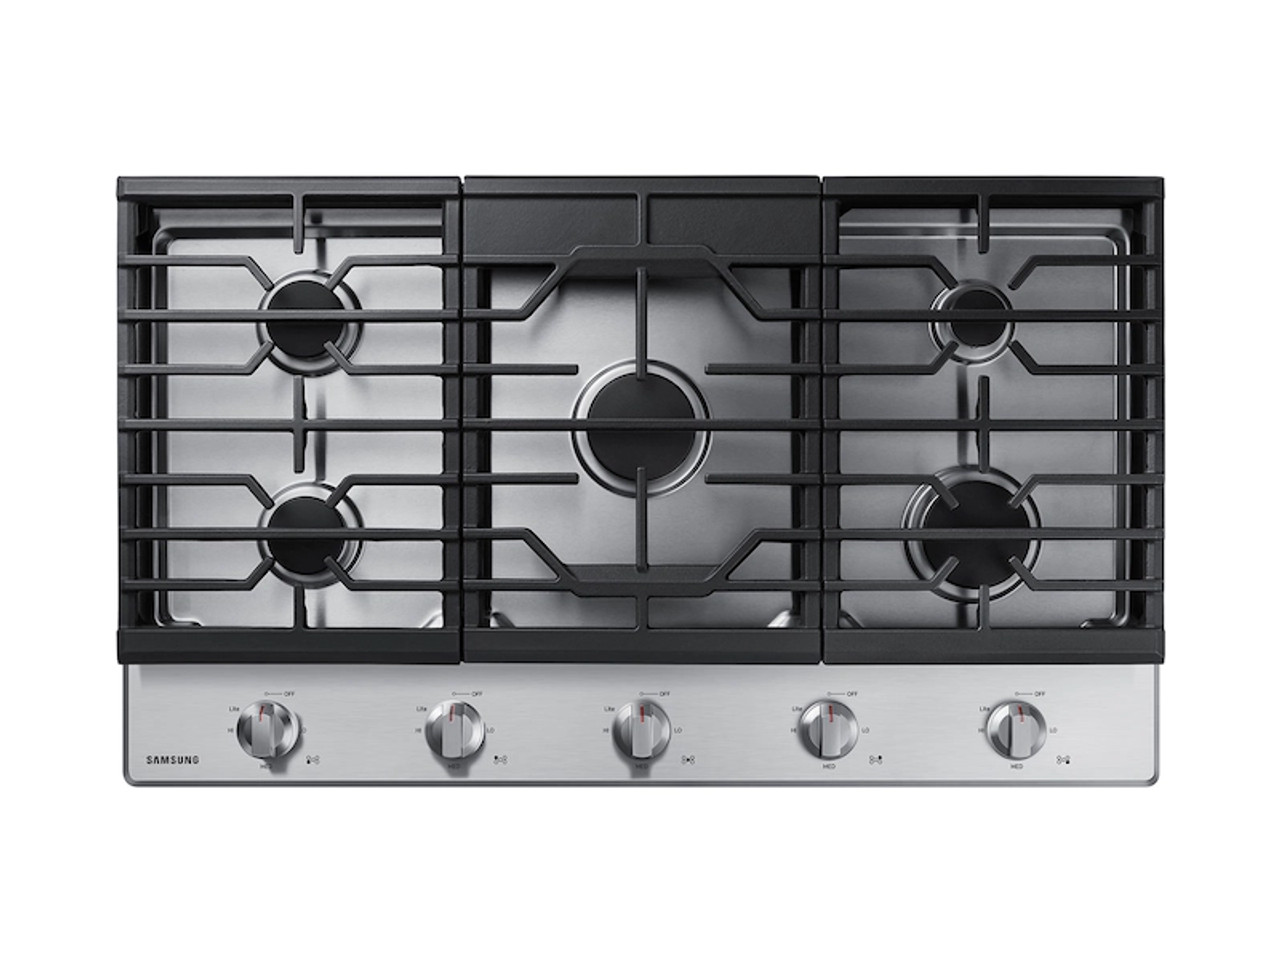 NA36R5310FS 36 in. Gas Cooktop in Stainless Steel with 5-Burners (Scratch and Dent)